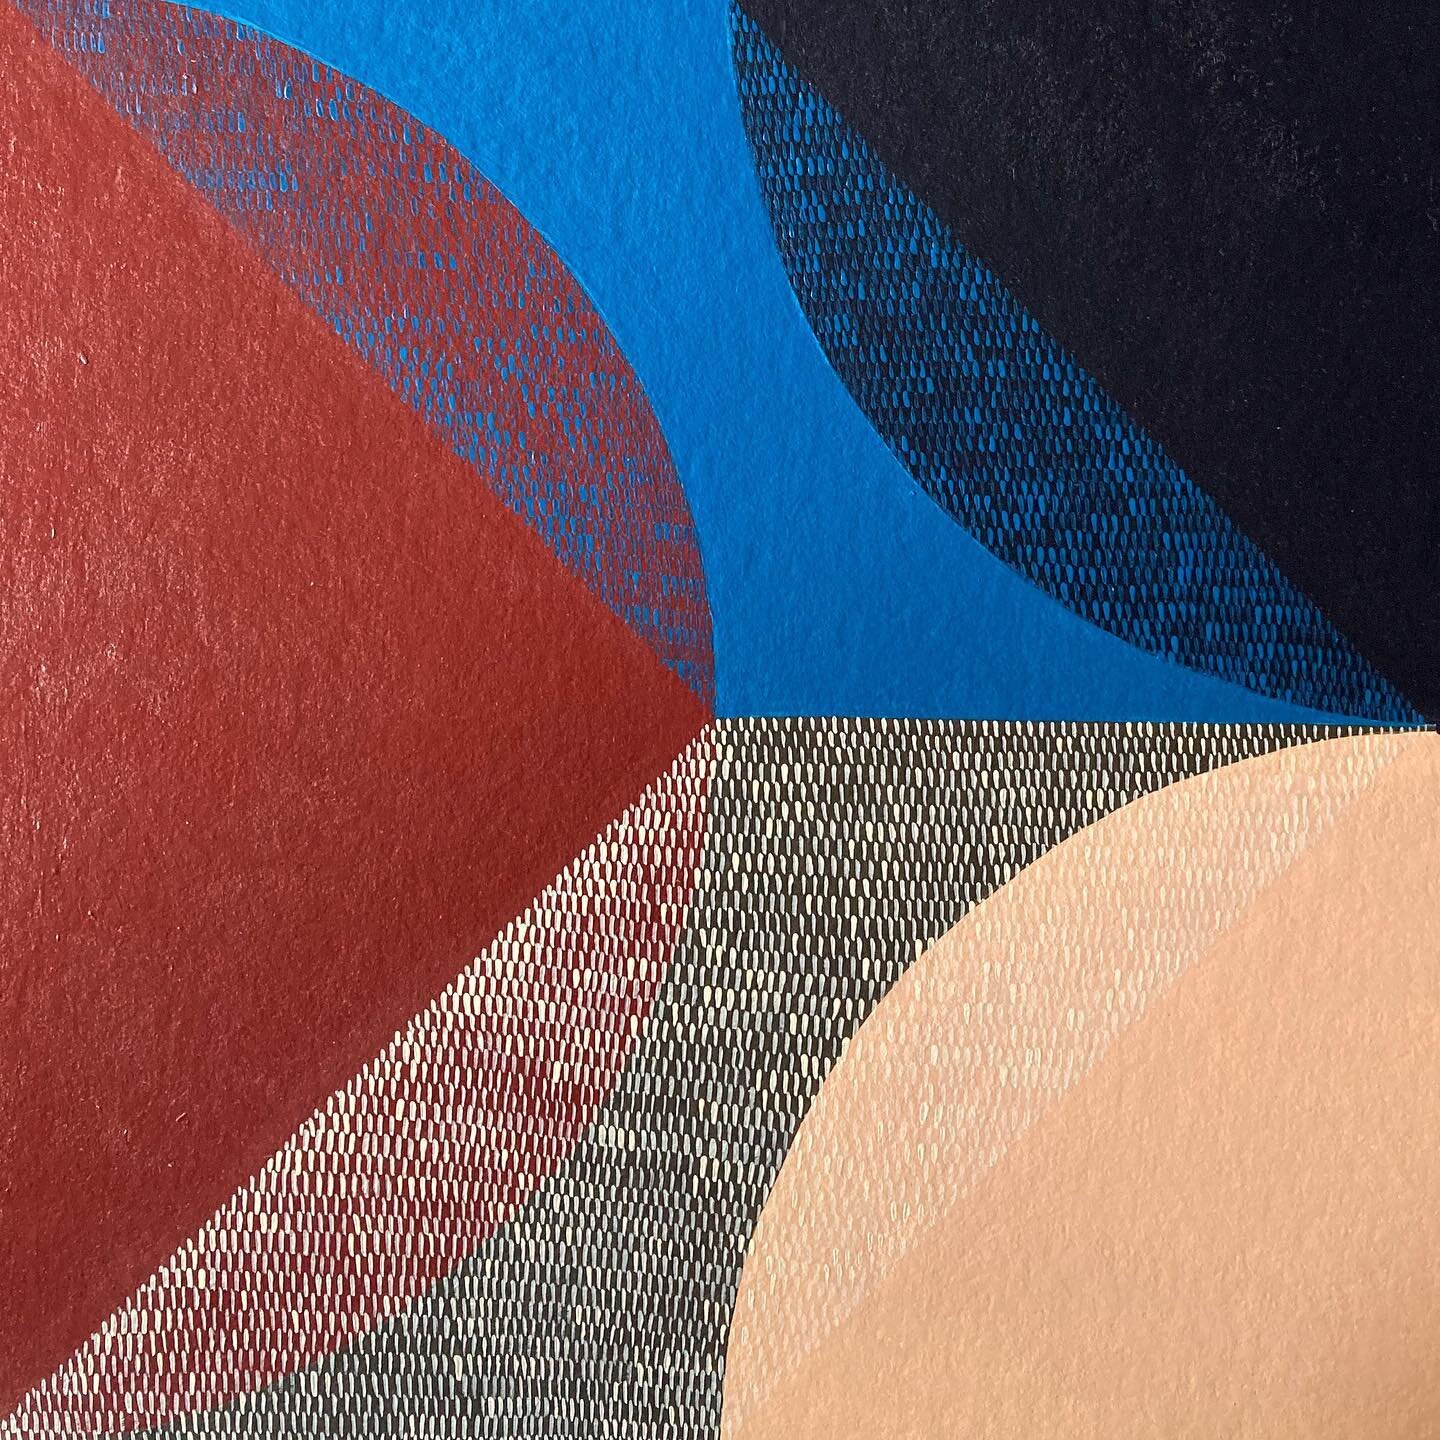 #detail shot of my current #wip it&rsquo;s a larger work (for me) on 640gsm archers paper, love working on paper with these tiny brushstrokes ❤️ have a good Monday! X
.
.
.

#kelsosullivan #art #design #illustration #illo #modernart #painting #modern